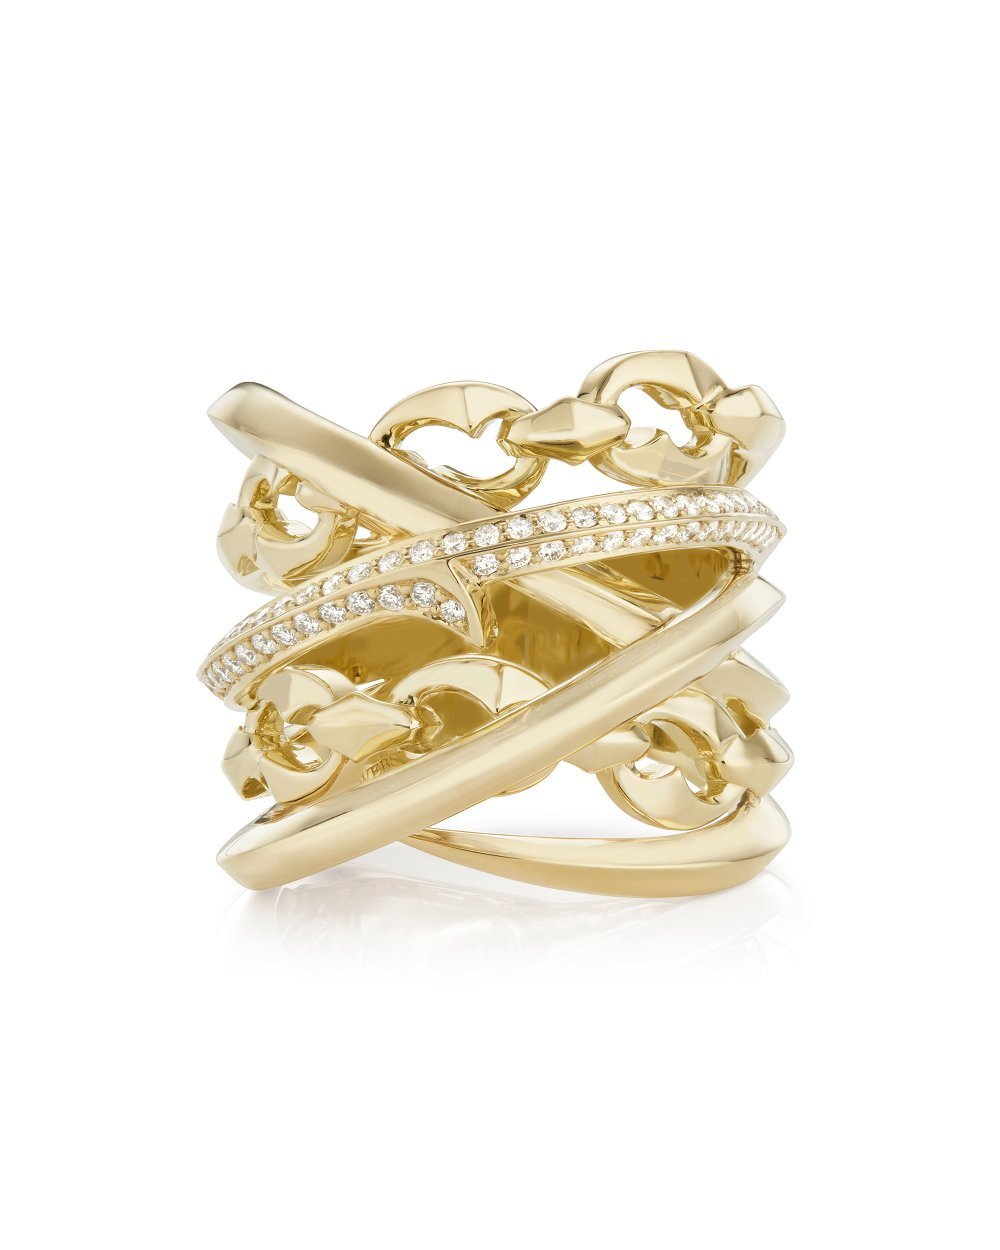 Thorn Embrace Bound Together Large Band Ring with White Diamonds in 18kt Yellow Gold